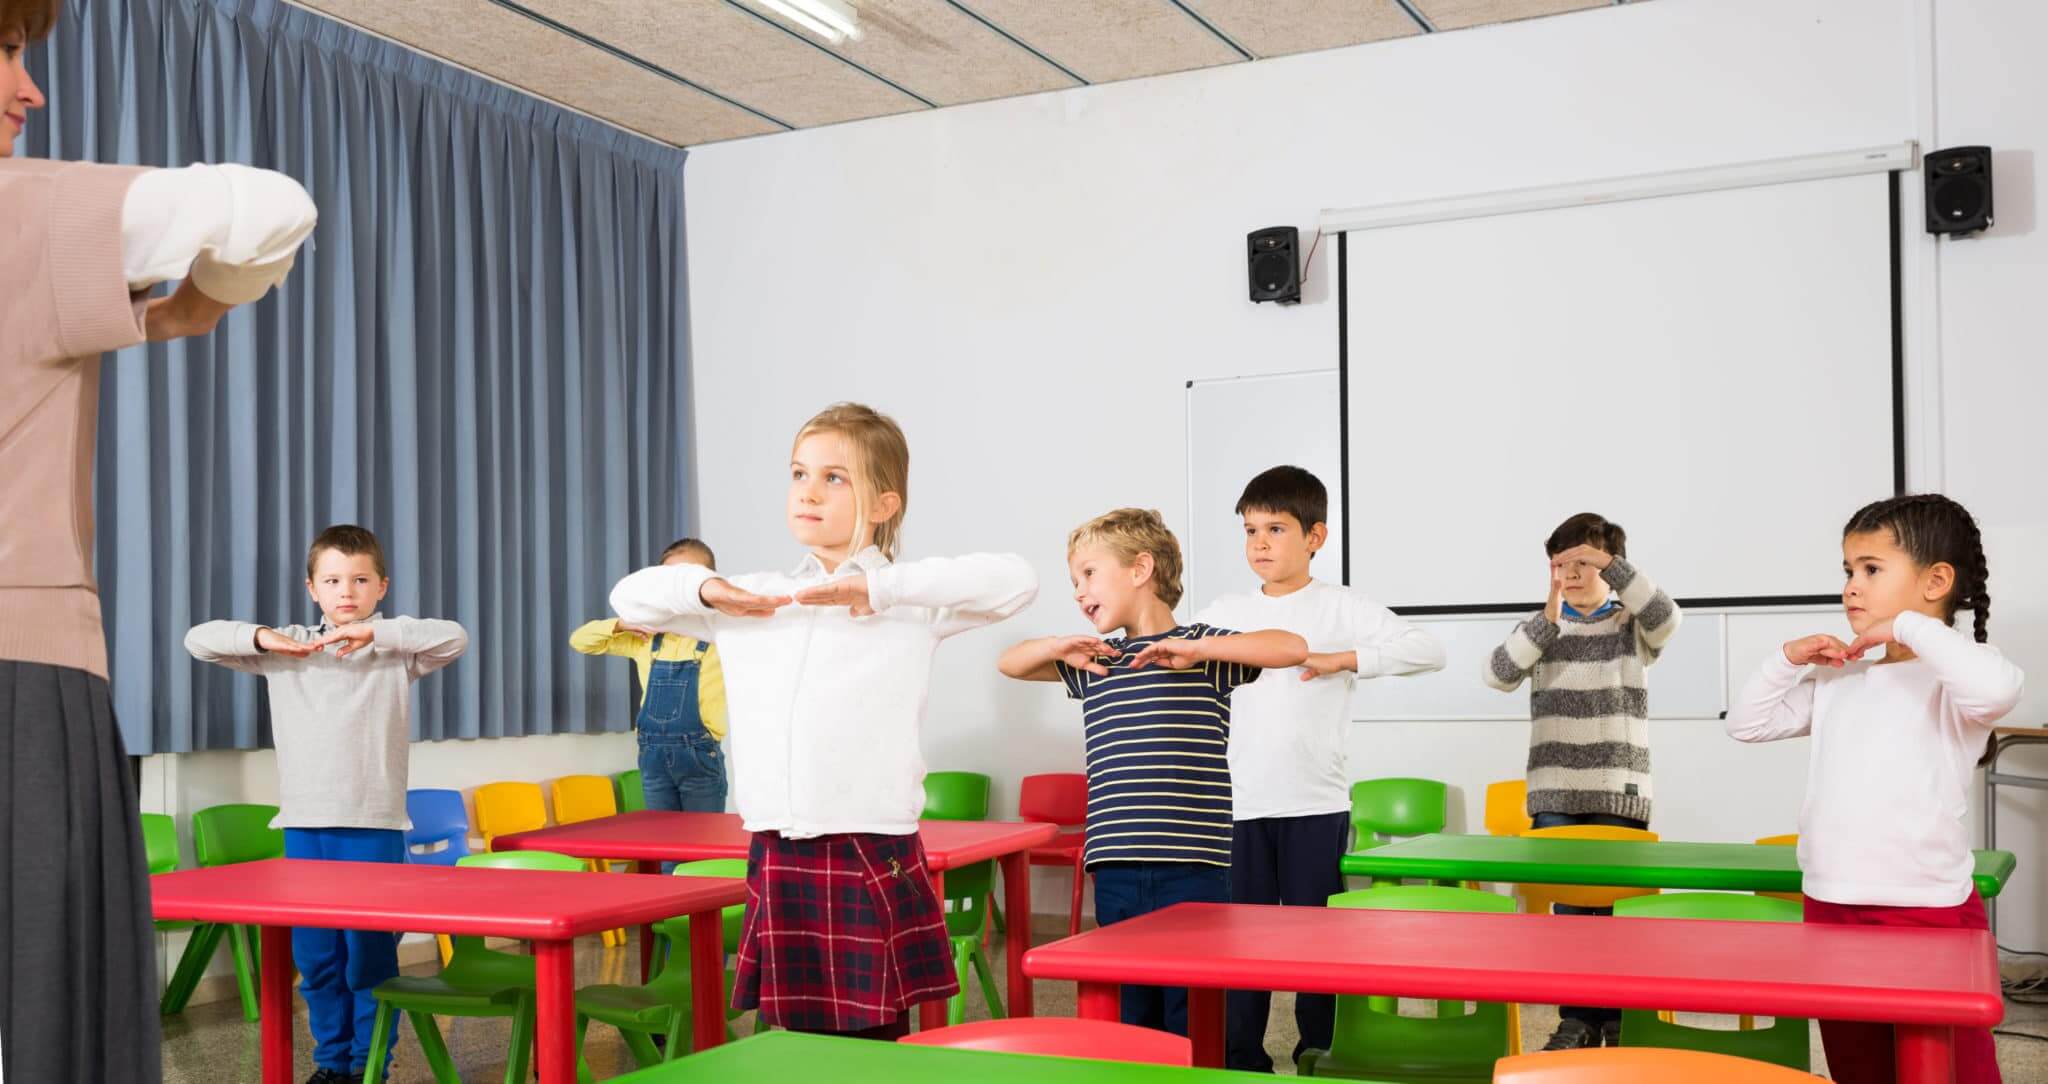 Elementary students standing in classroom doing arm stretches per the teacher's instructions